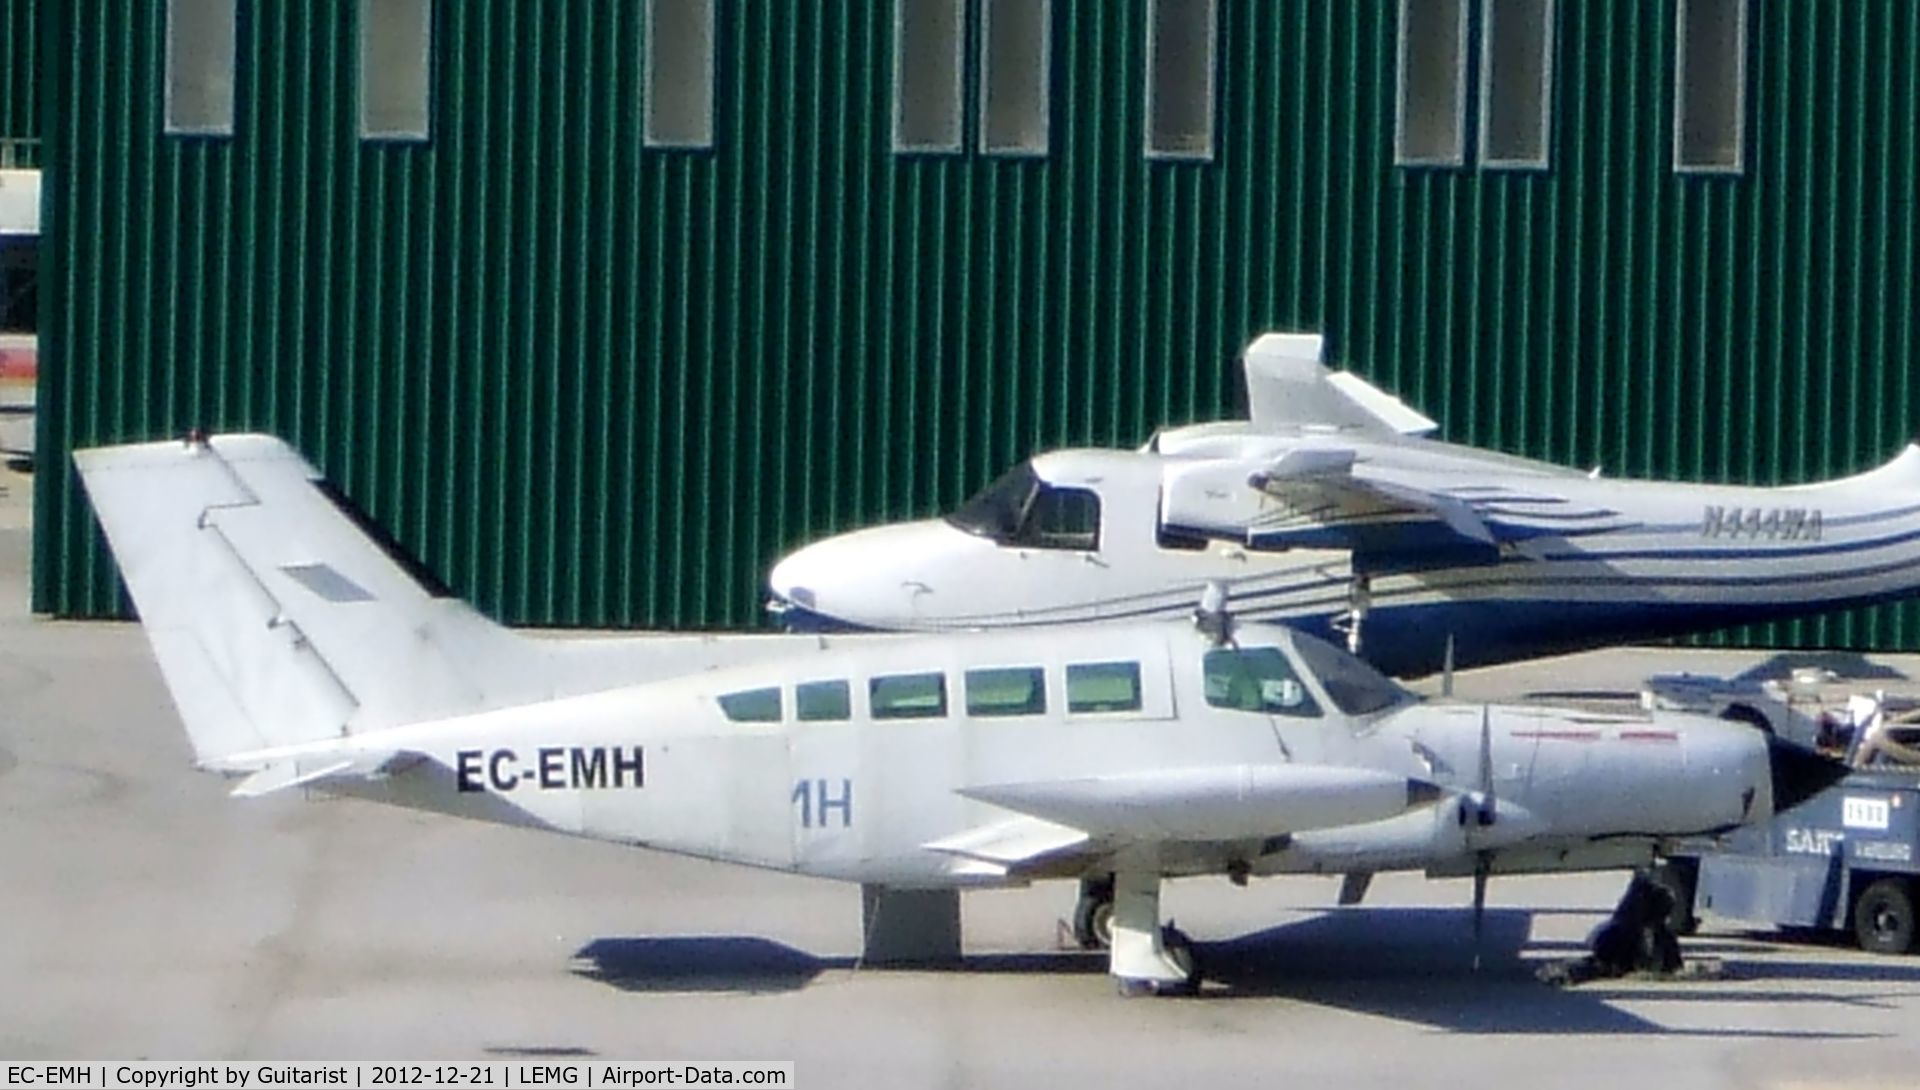 EC-EMH, Cessna 402B C/N 402B-0534, This Cessna looks a bit sorry for itself. N444WA Aero commander is in the background